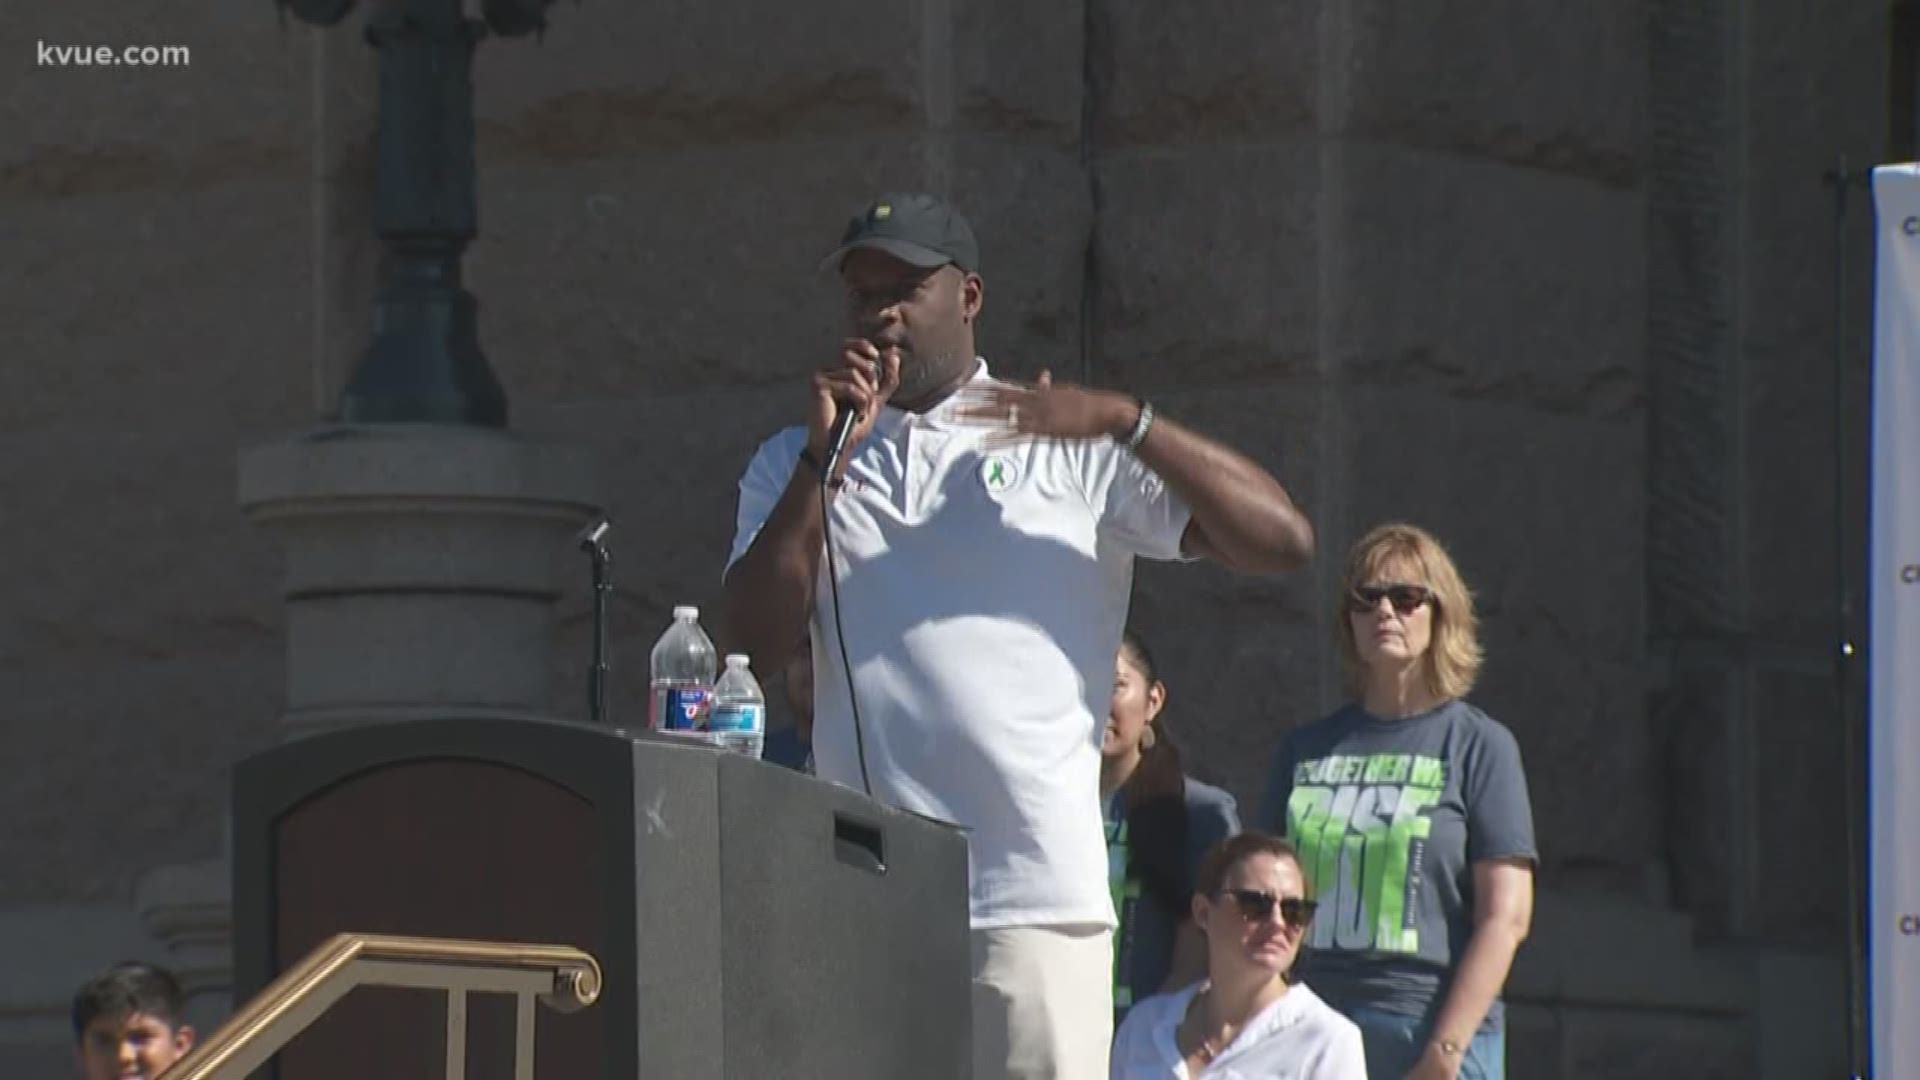 Former NFL and Longhorn football stand out, Vince Young, stepped into the public spotlight at the State Capitol on Saturday for a good cause.